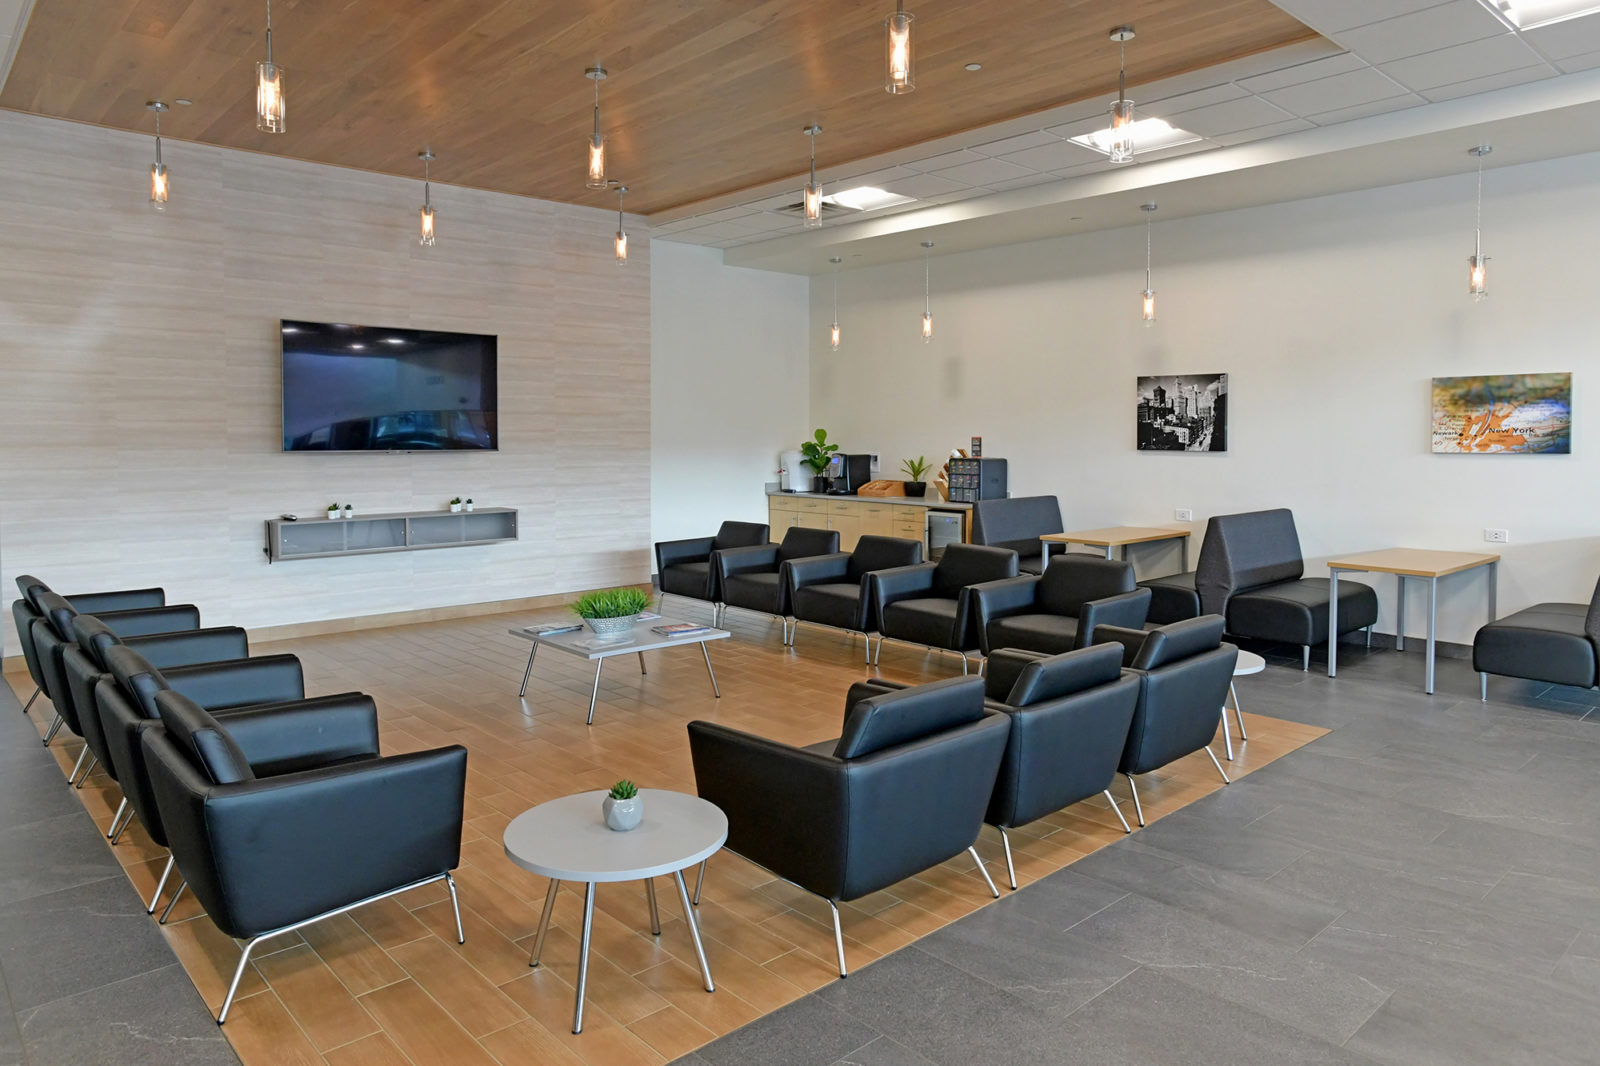 Waiting area at car dealership. Black club chairs lined up in a U-shape gathered around a coffee table. There are booths along the back wall.